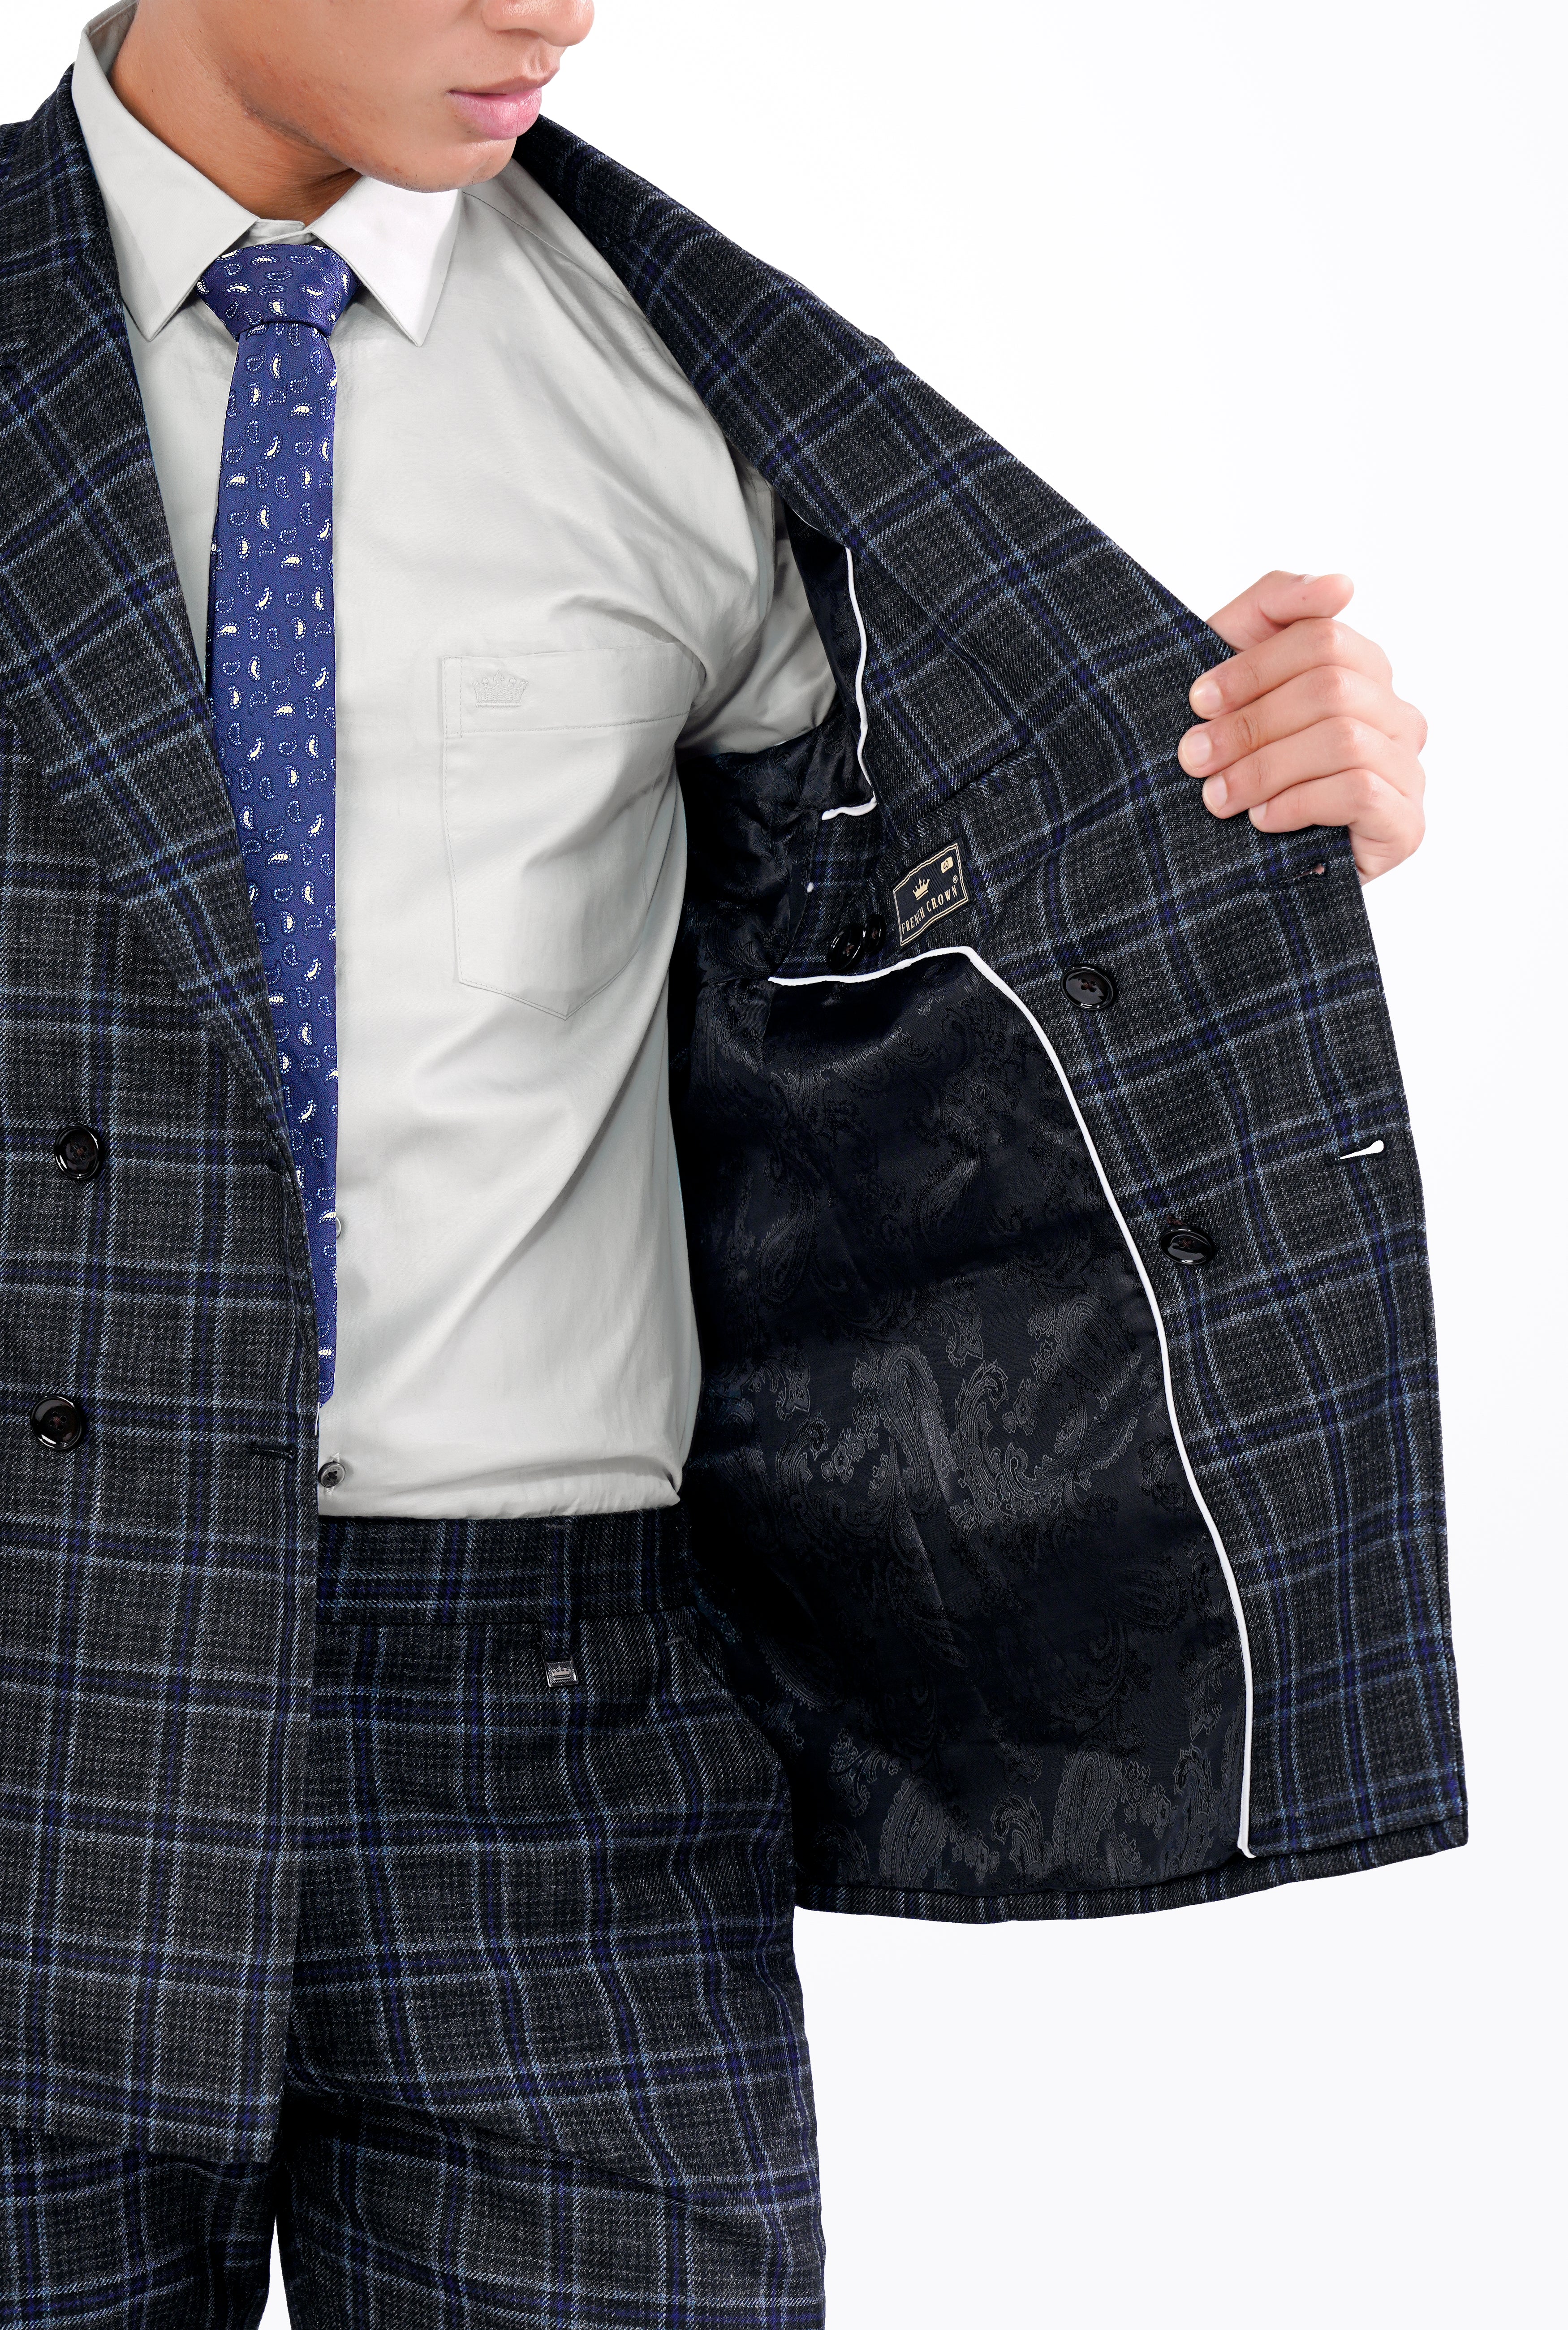 Bleached Black and Marine Blue Plaid Double Breasted Tweed Blazer BL2907-DB-36, BL2907-DB-38, BL2907-DB-40, BL2907-DB-42, BL2907-DB-44, BL2907-DB-46, BL2907-DB-48, BL2907-DB-50, BL2907-DB-52, BL2907-DB-54, BL2907-DB-56, BL2907-DB-58, BL2907-DB-60